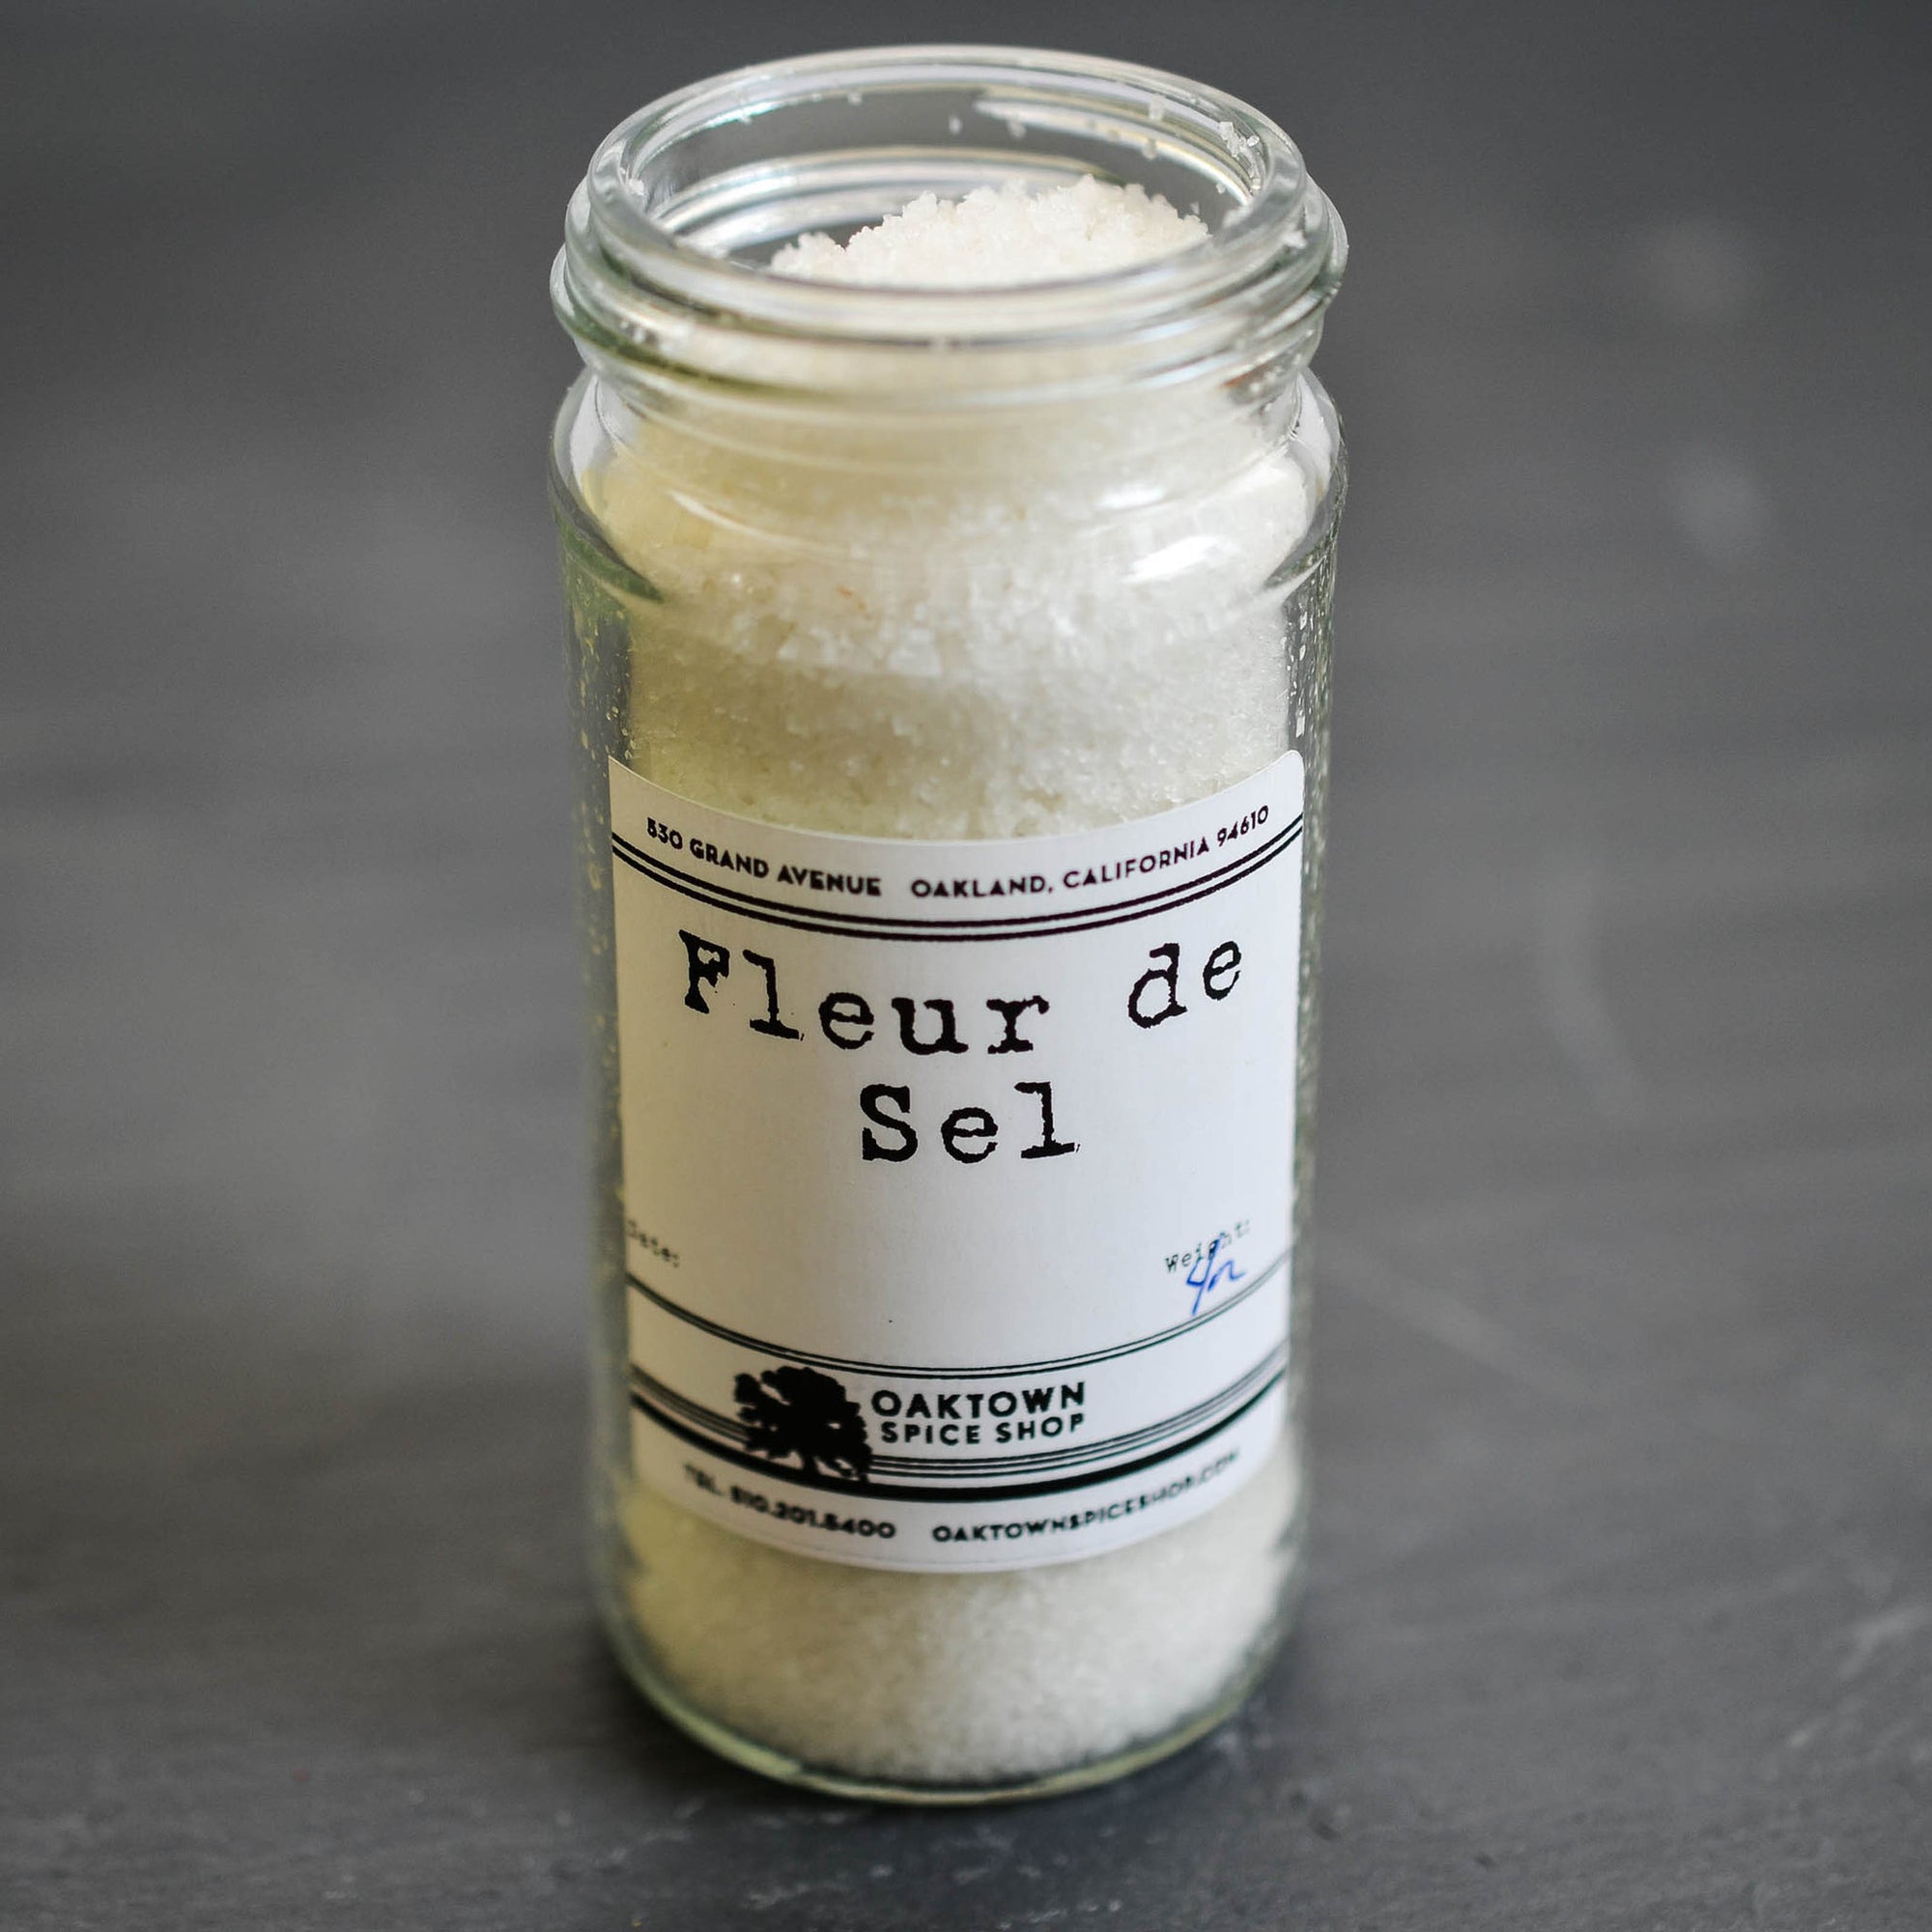 Fleur de Sel by Oaktown Spice Shop is an artisanal salt, hand-harvested from the top layer of the salt marshes